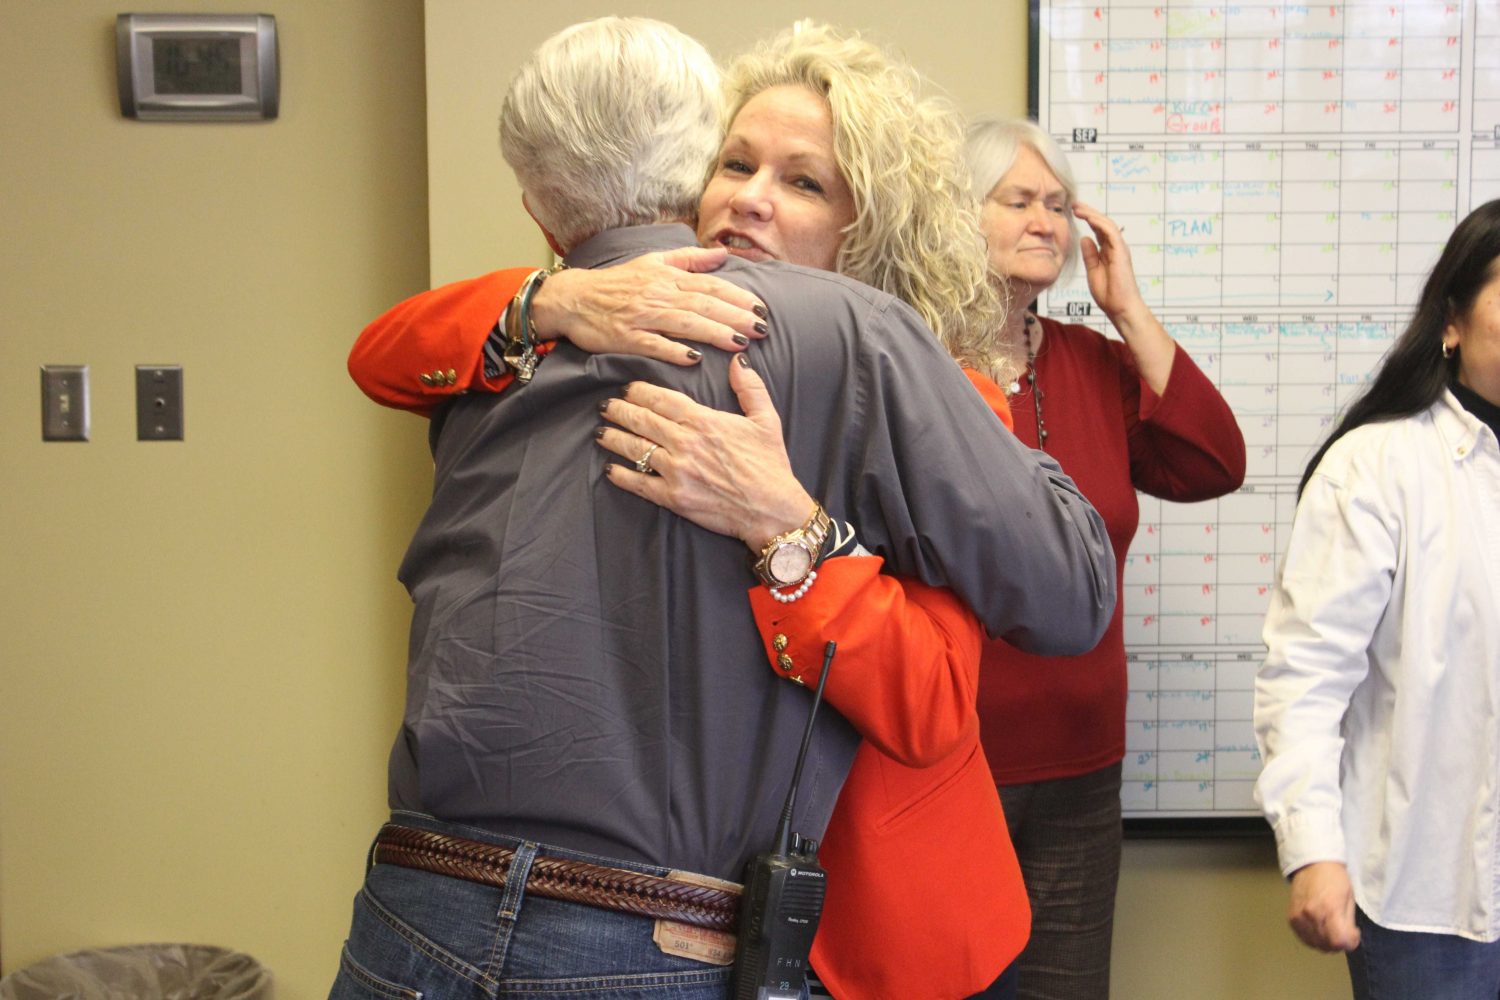 Head Principal Jack Ameis receives a hug from FHSD Superintendent Pam Sloan after he was presented with his award (matt krieg).